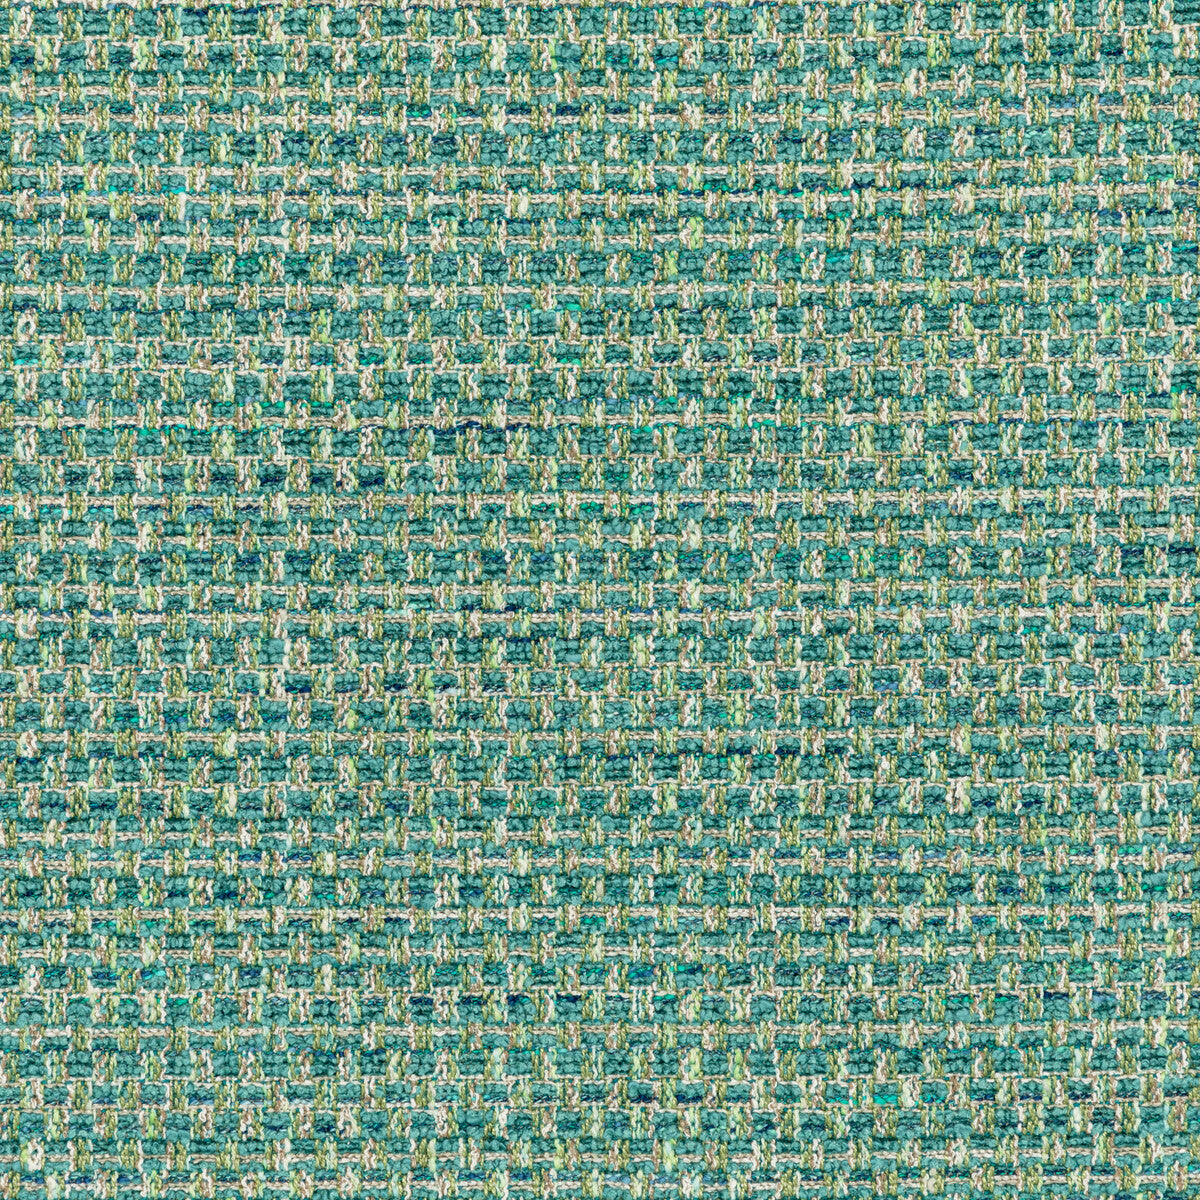 Rue Cambon fabric in peacock color - pattern 36102.353.0 - by Kravet Couture in the Luxury Textures II collection